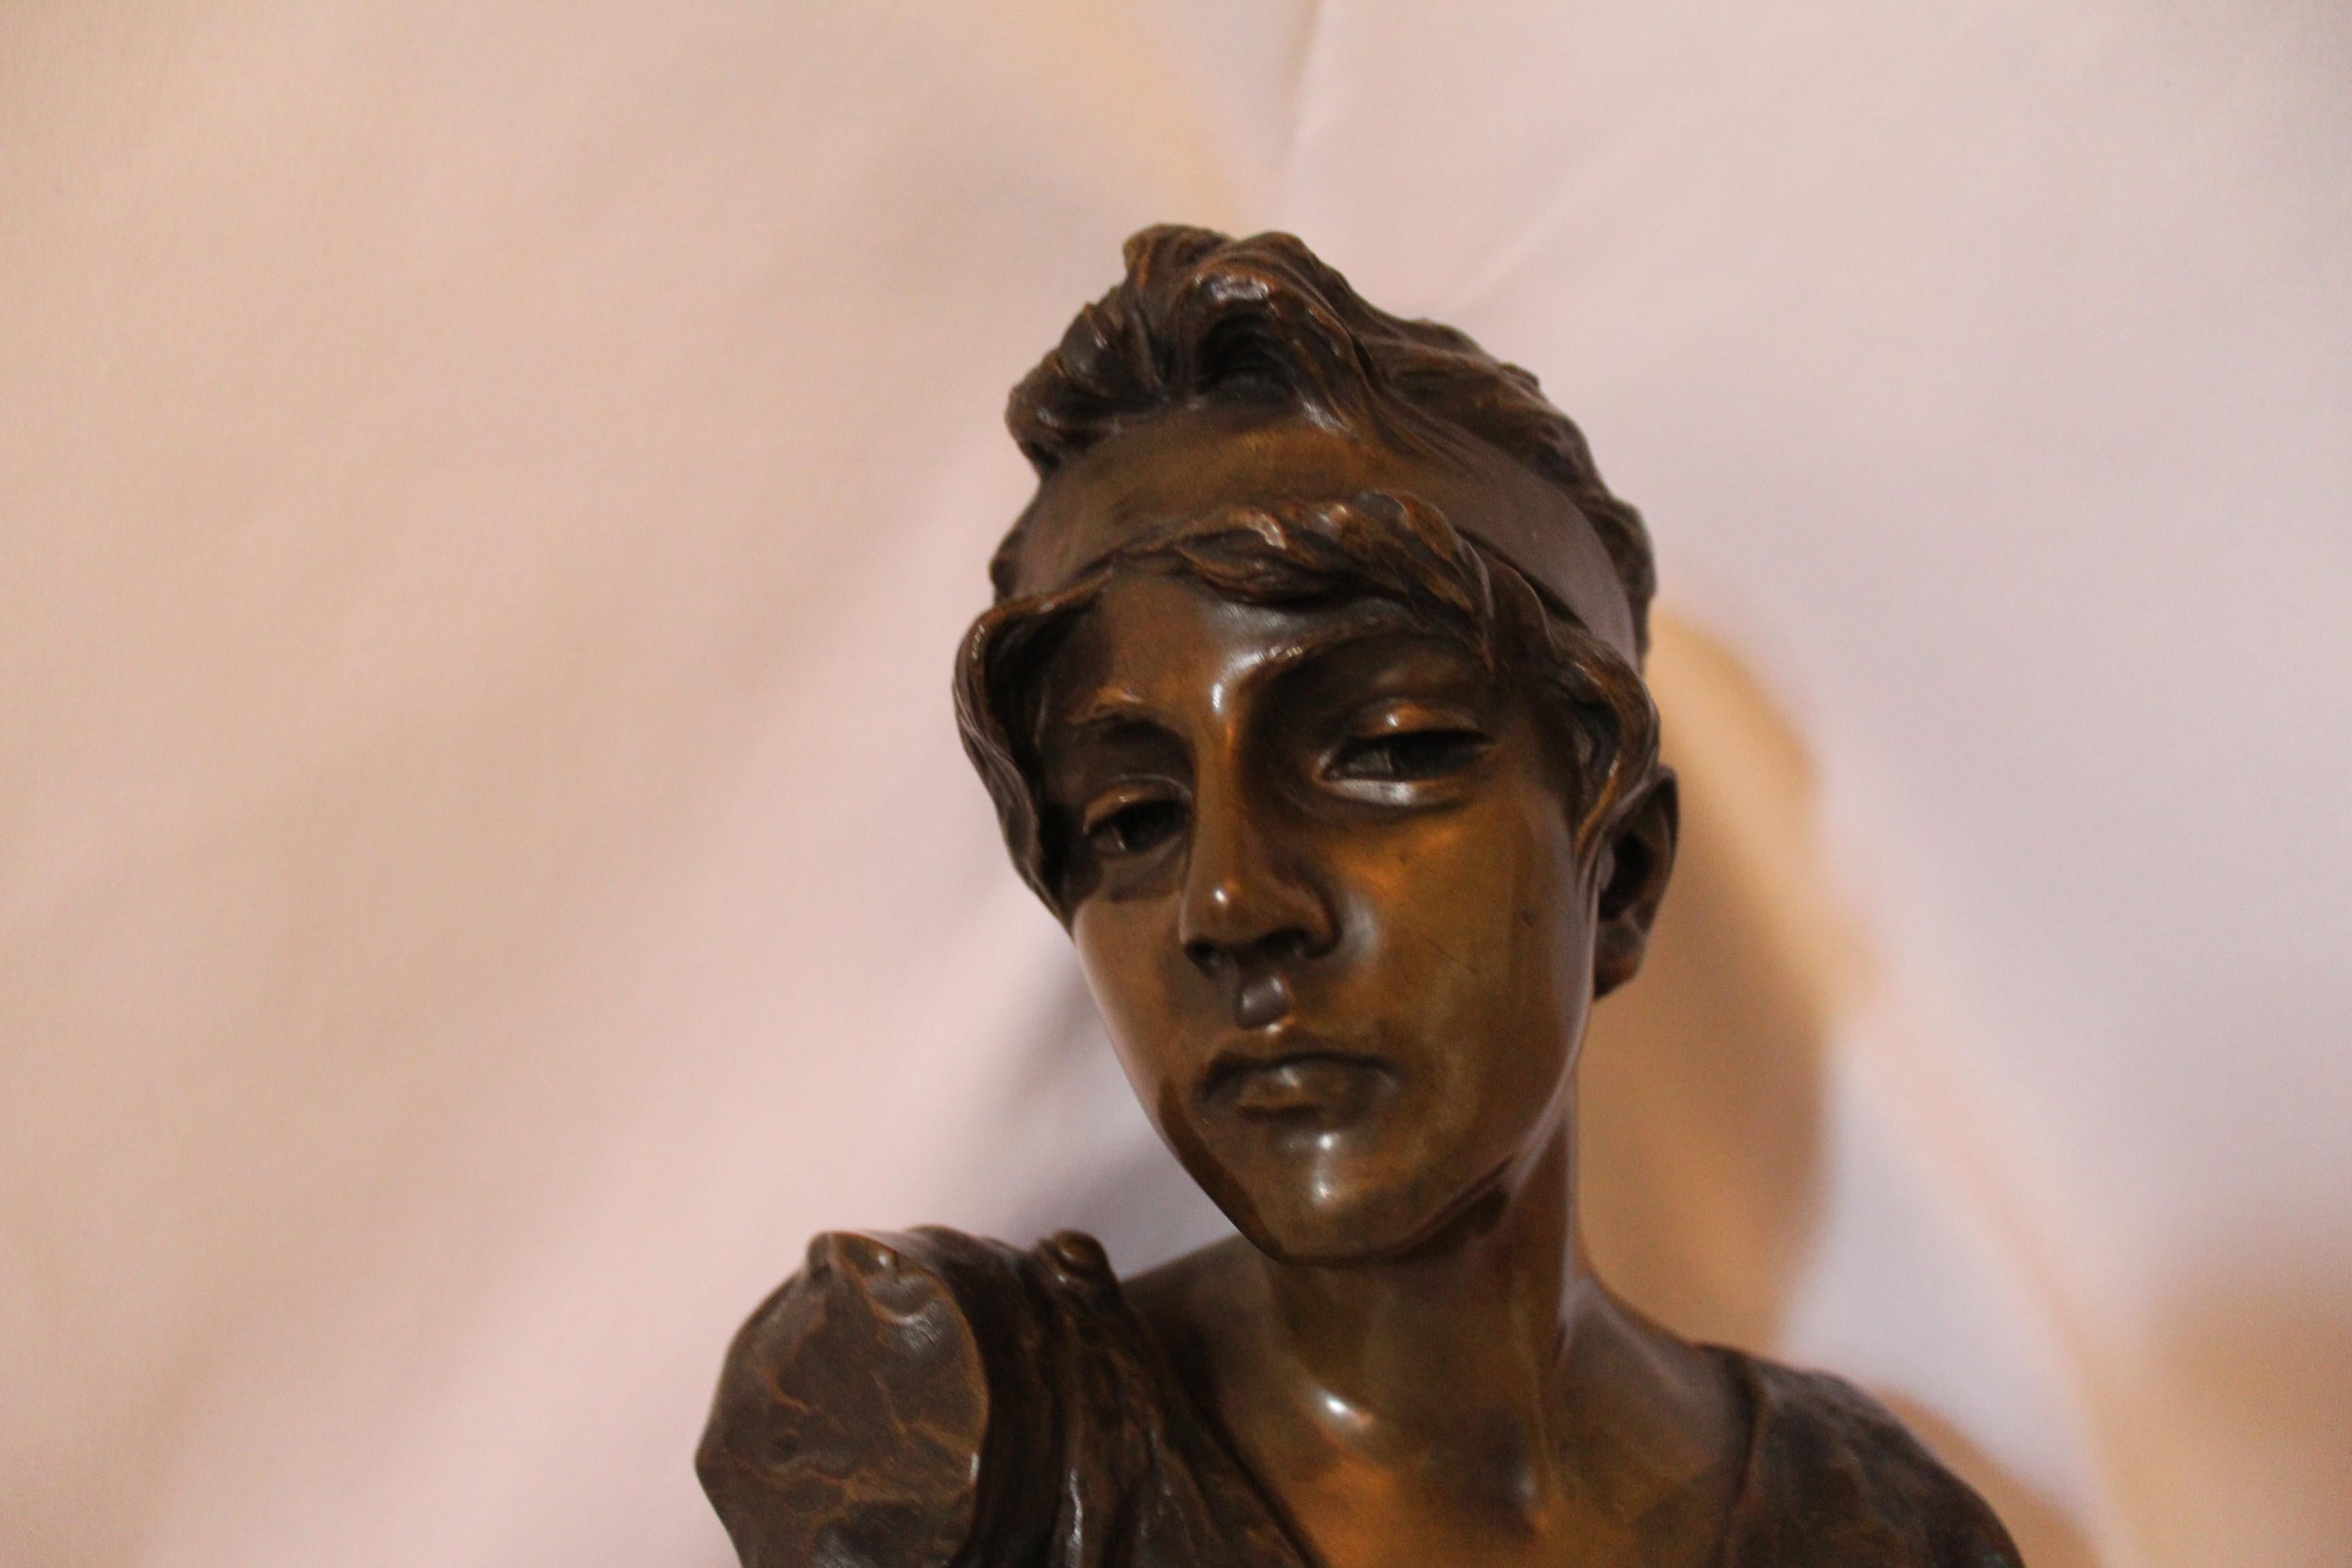 A medium size bronze bust signed by E. Villanis circa 1890s. With great multi-patinas and in real good condition. From a private collector of Villanis busts. Size 12